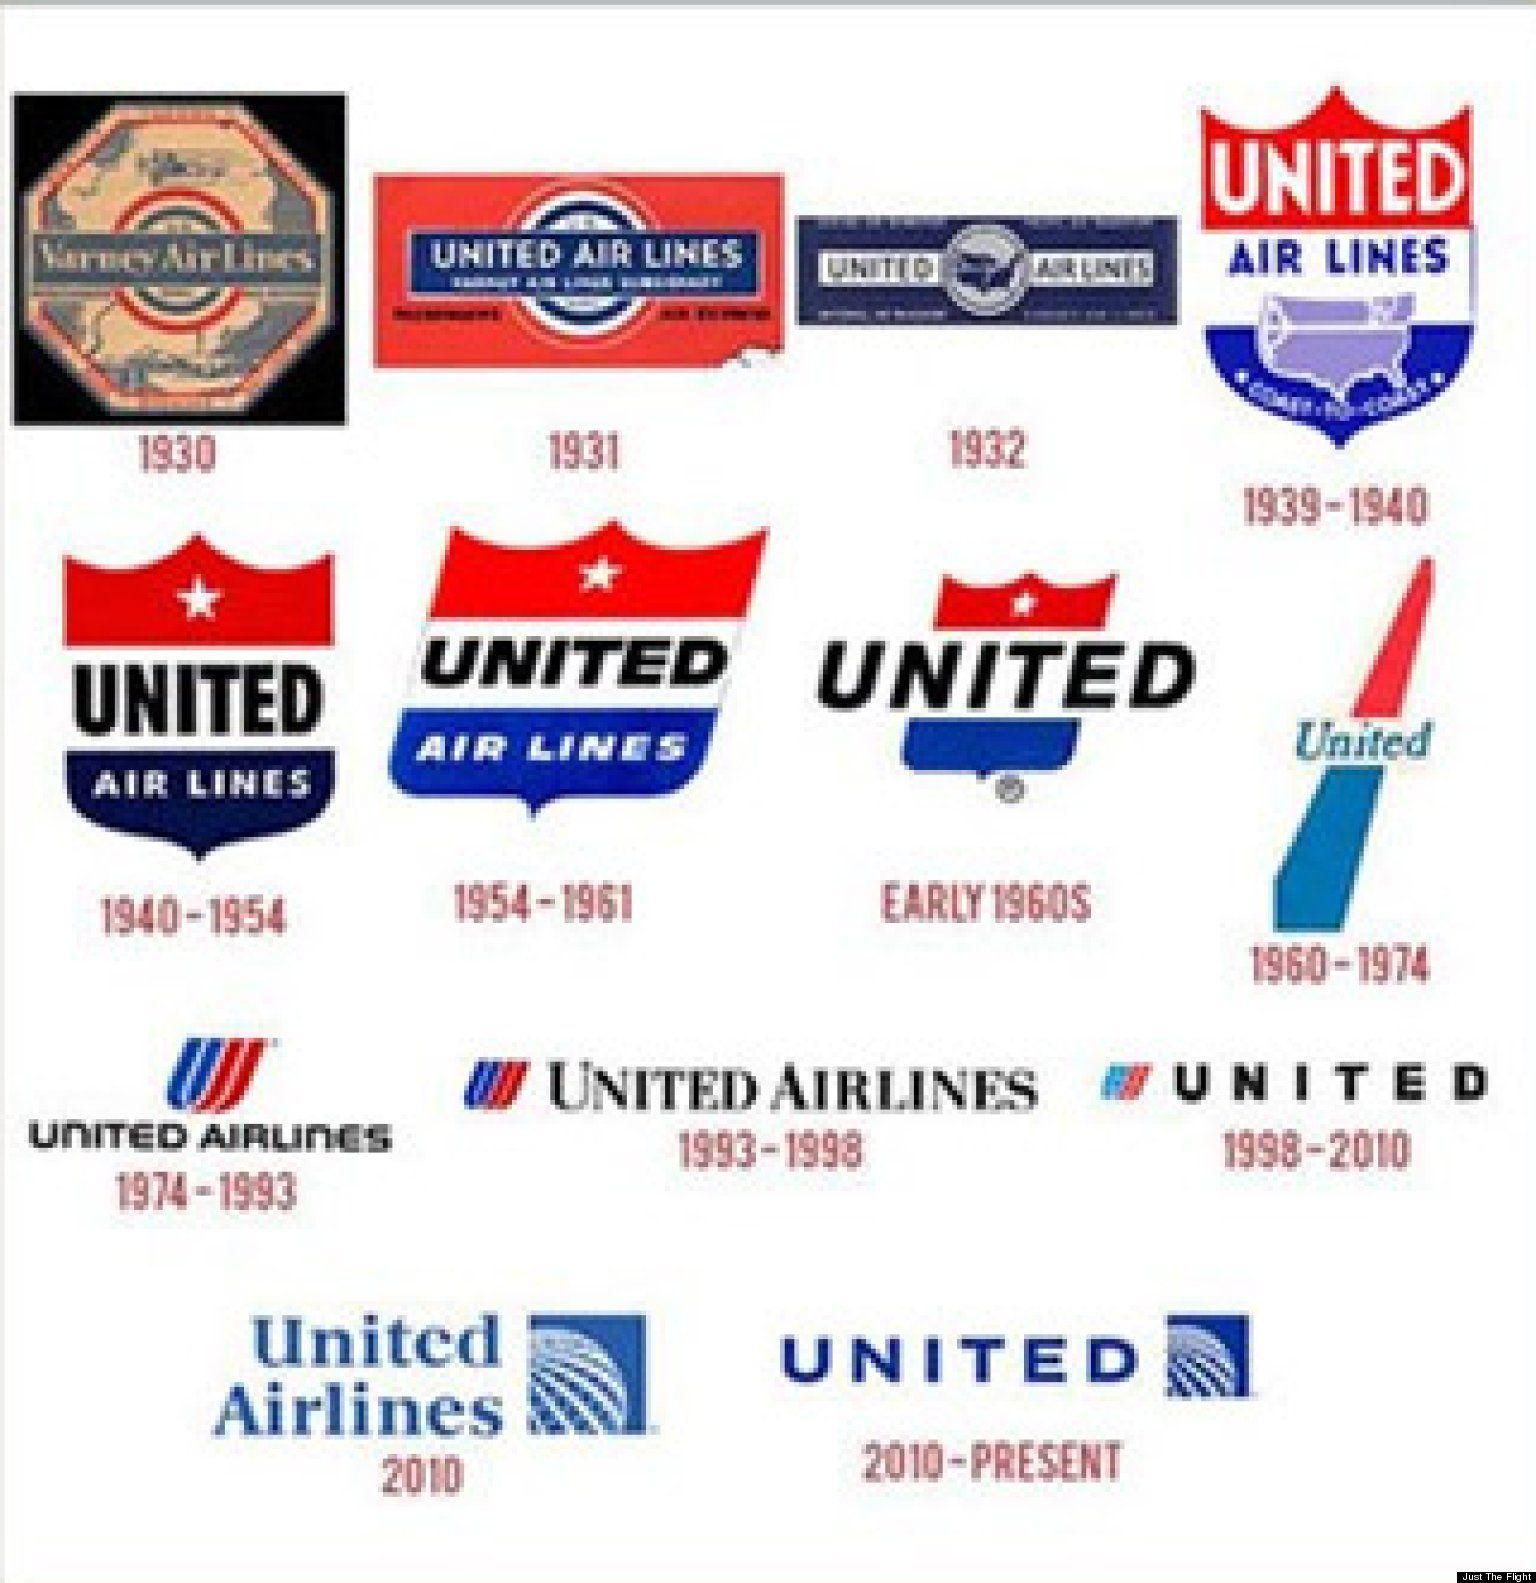 USA Airline Logo - airline logos and names - Kleo.wagenaardentistry.com